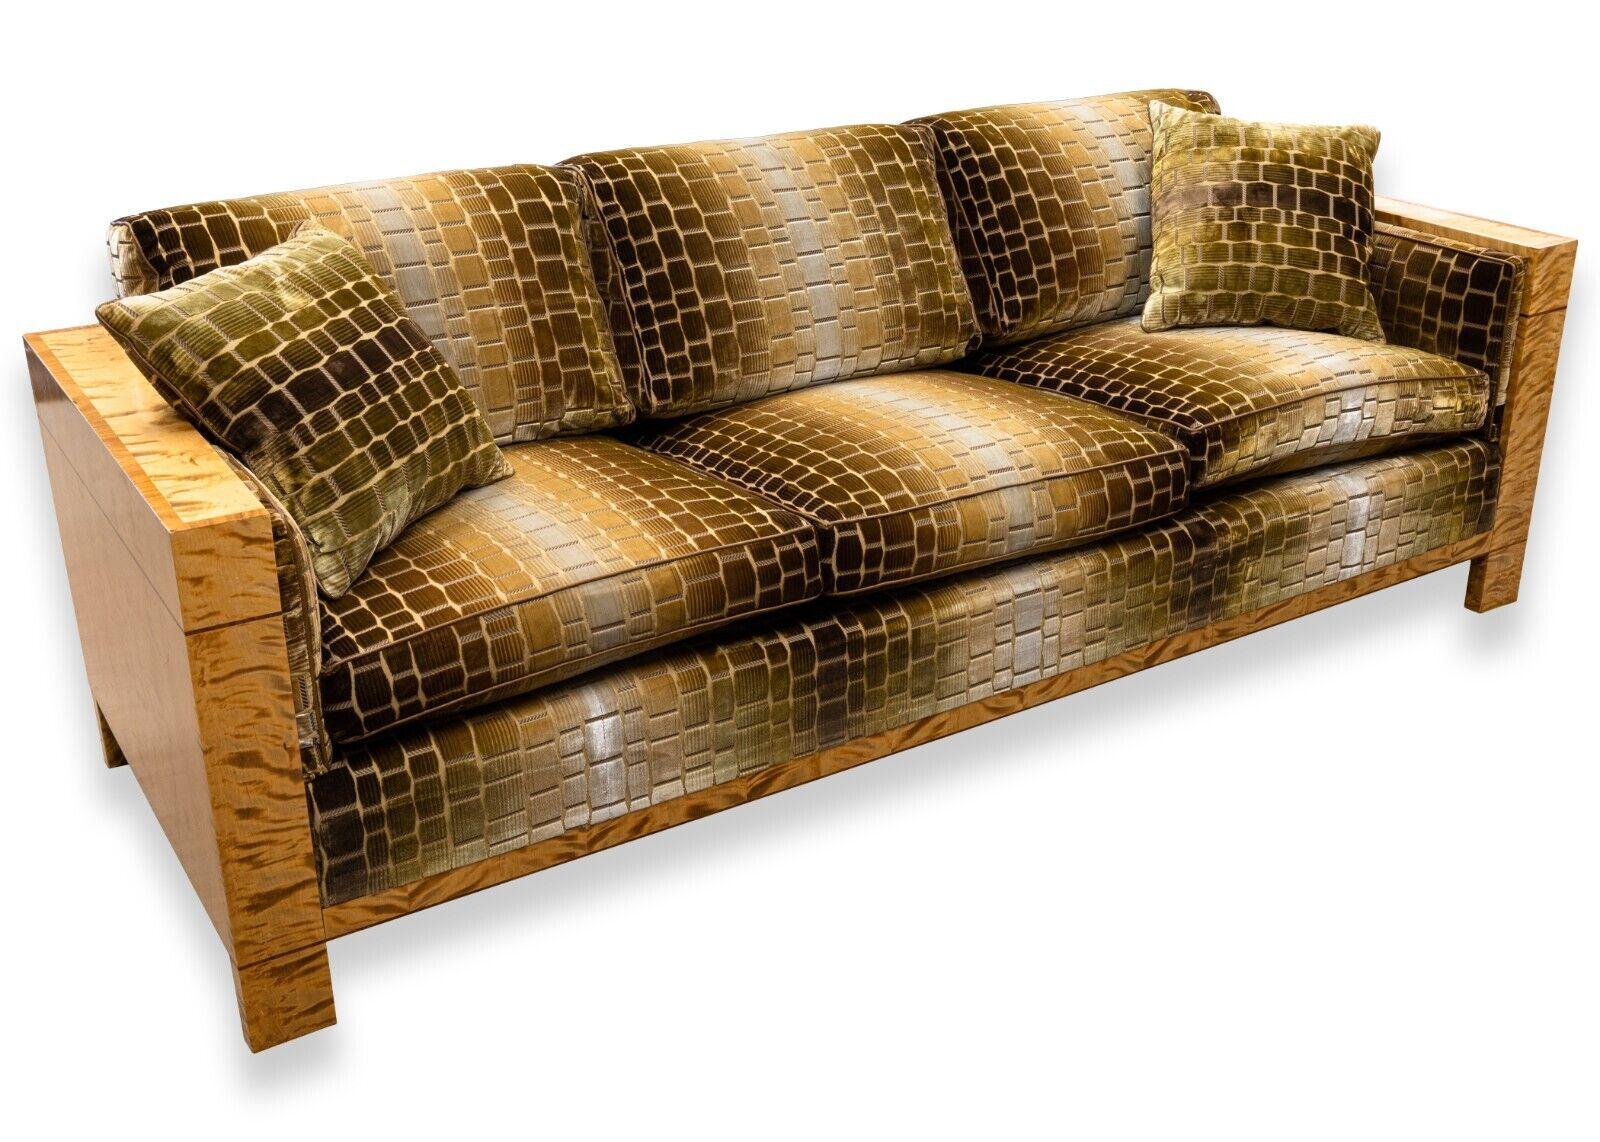 A Bruno & Karl Mathsson Varnamo 1934 wood wrapped sofa. This is an absolutely jaw-dropping sofa from Swedish designers and manufacturers Bruno & Karl Mathsson. This amazing sofa was created in 1934, almost 90 years old, and this piece is still in